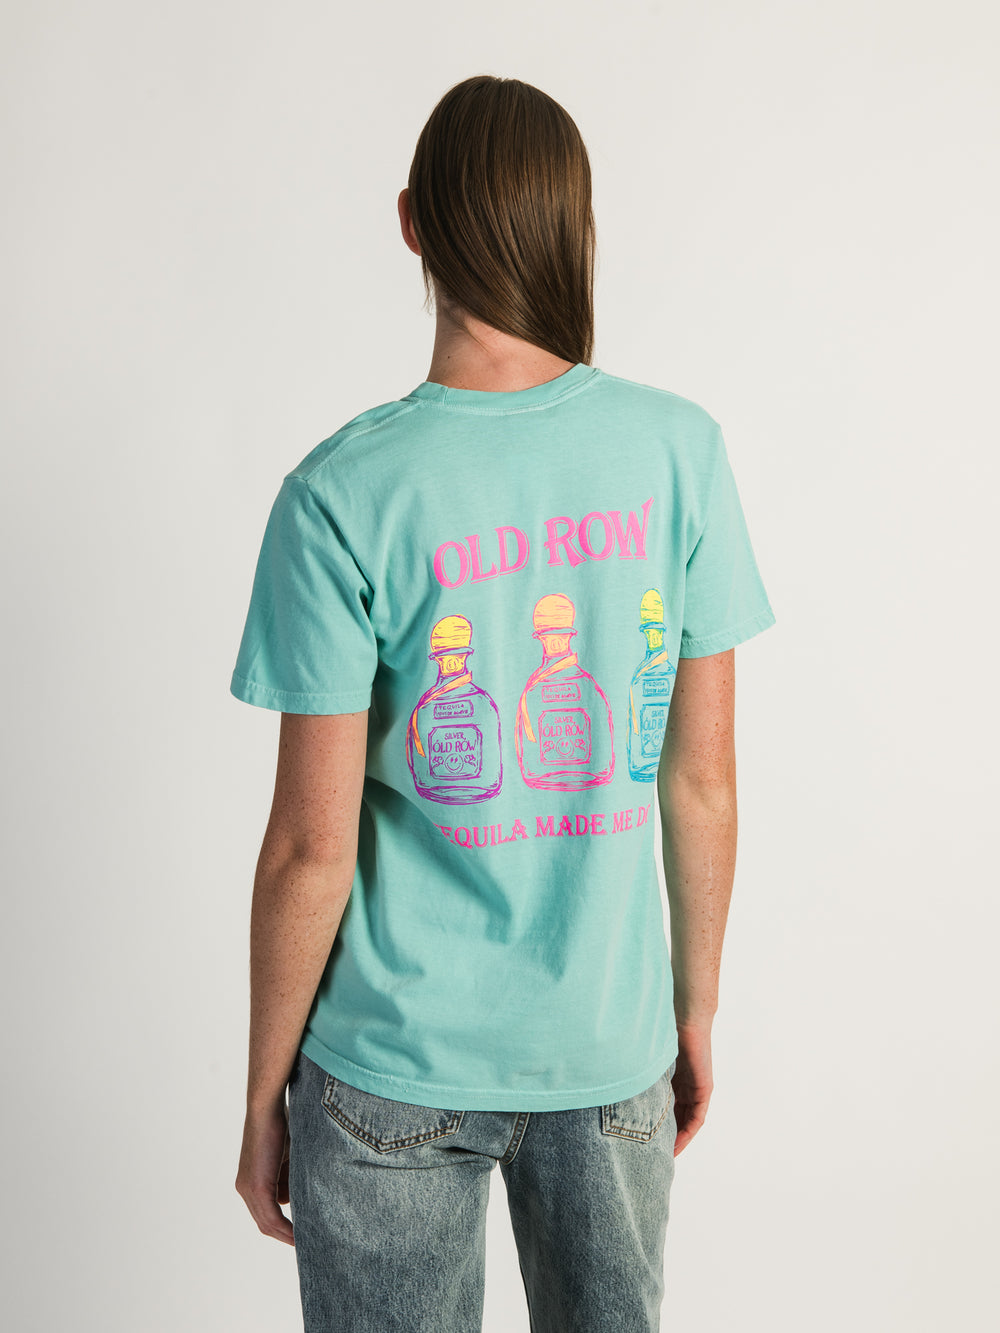 OLD ROW TEQUILA MADE ME DO IT TEE